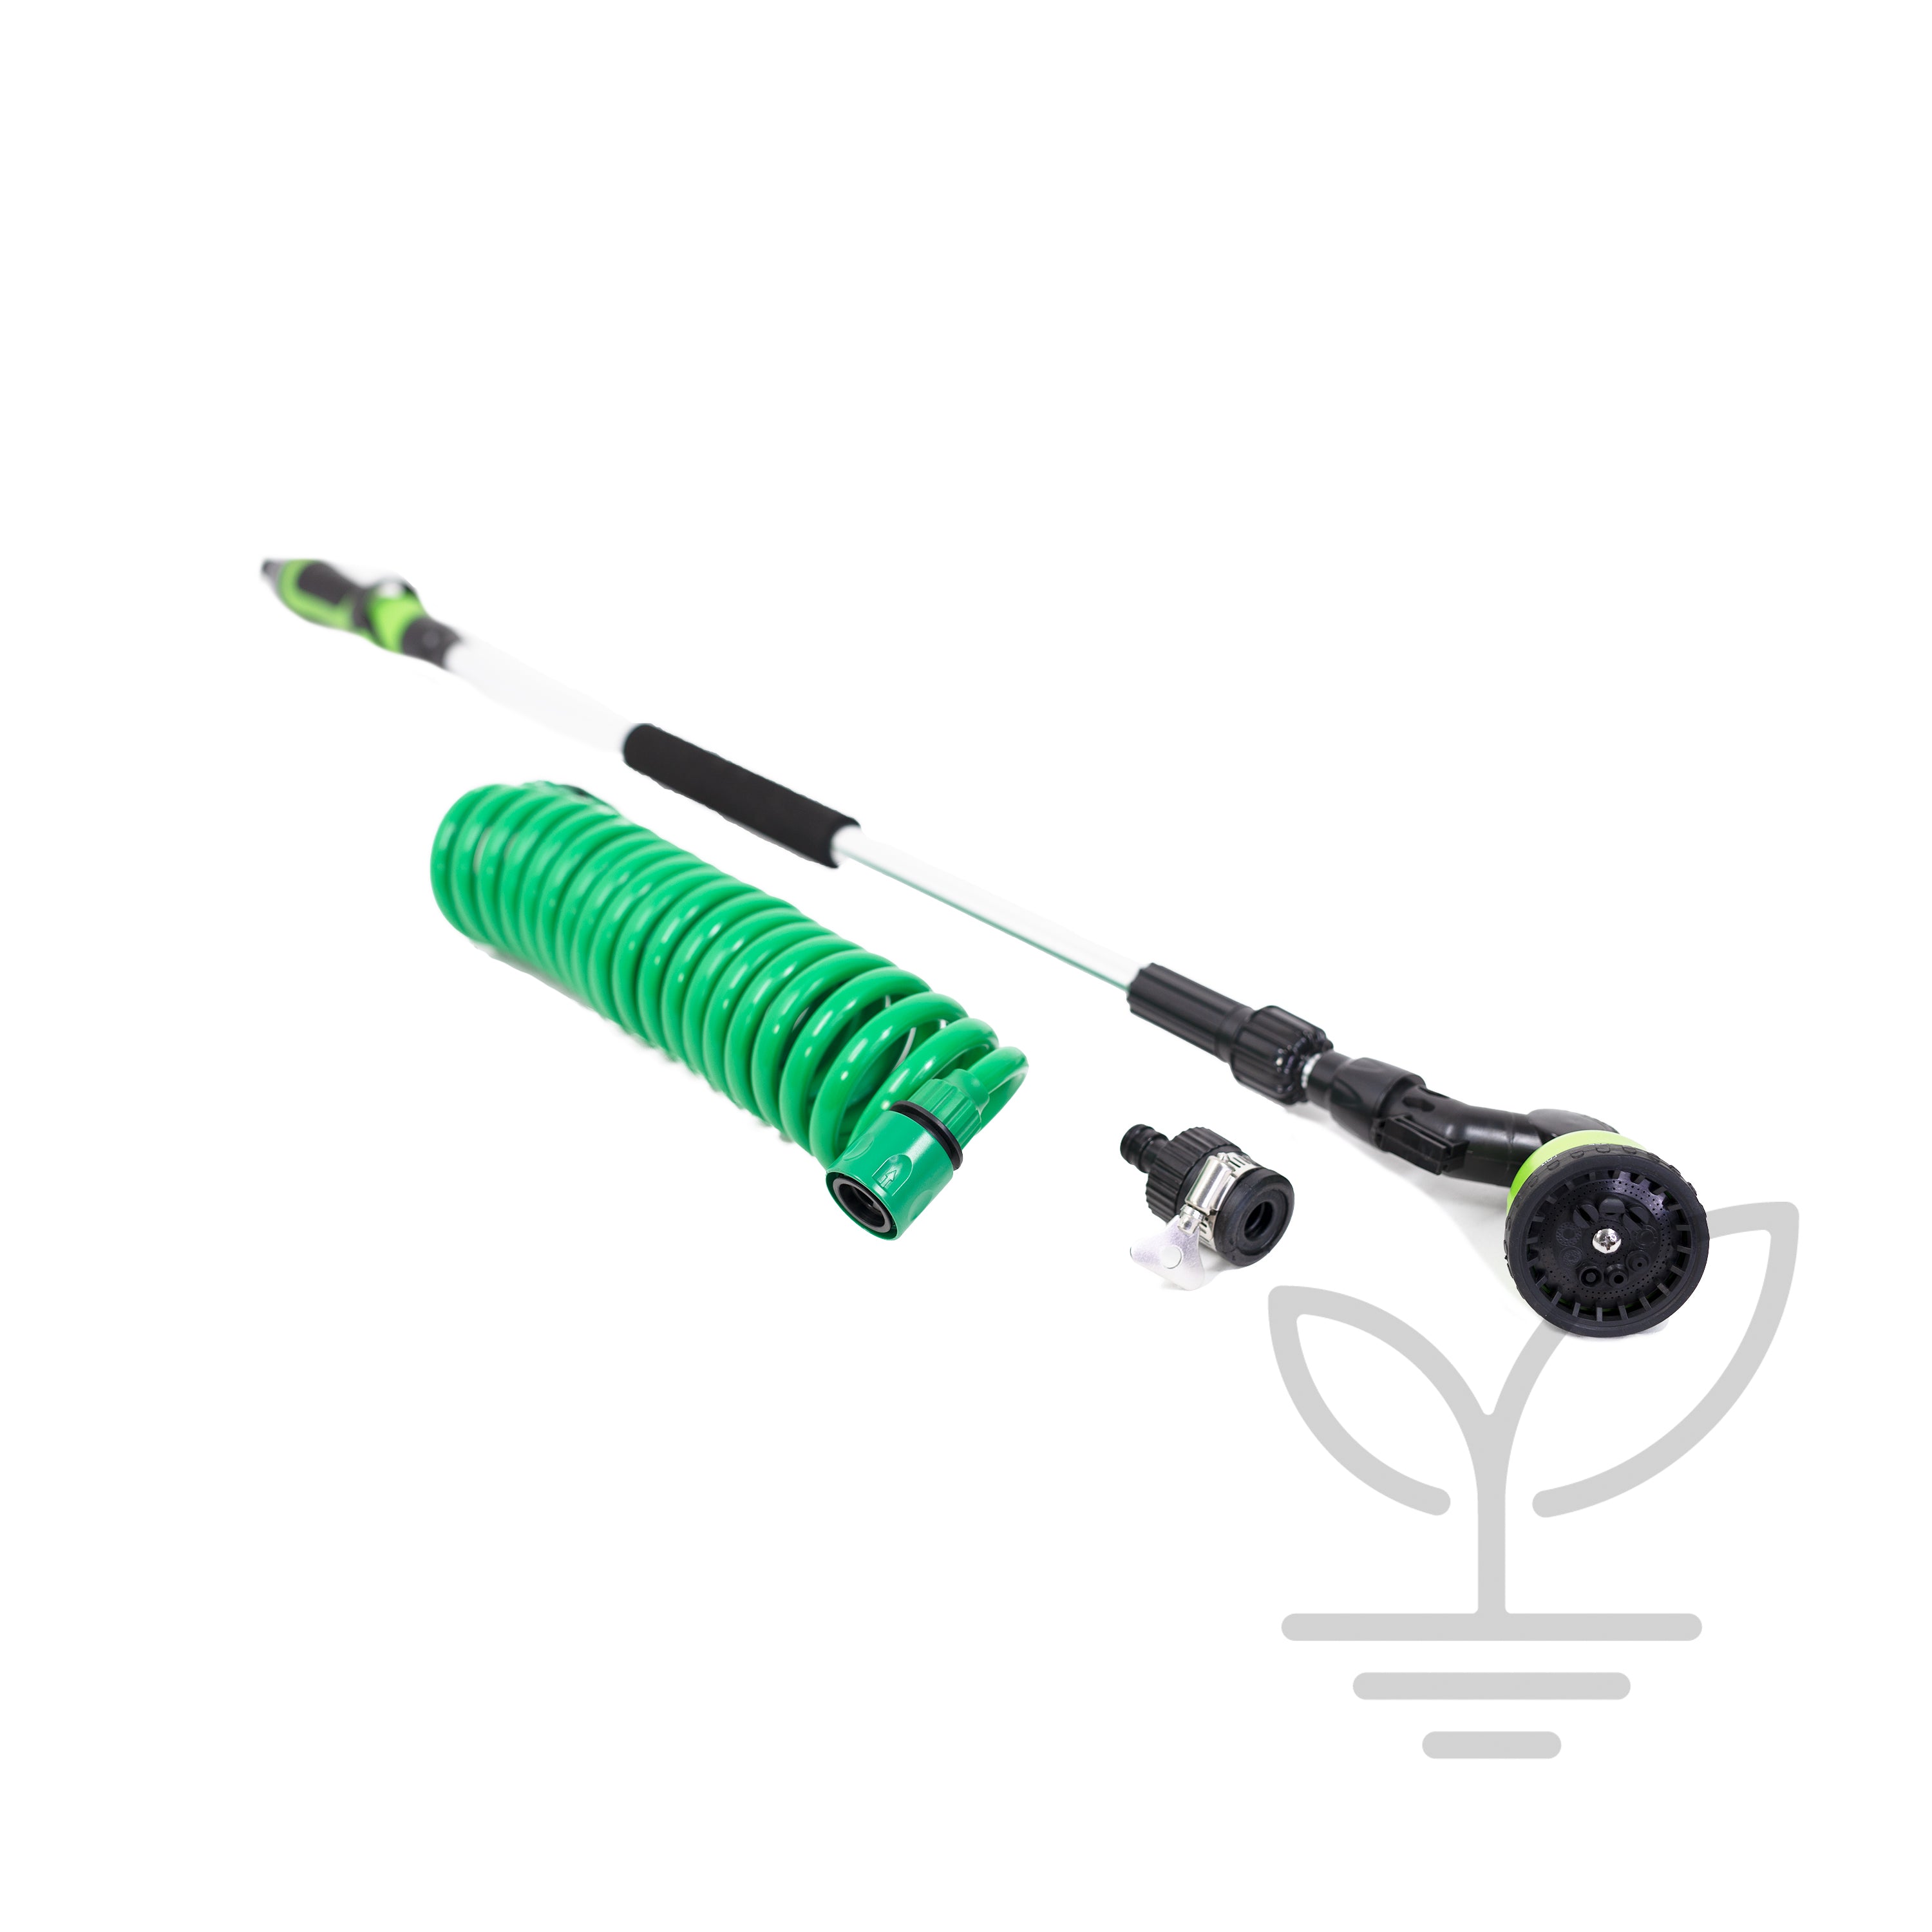 Telescopic Watering Wand w/ 9 Function Spray Nozzle